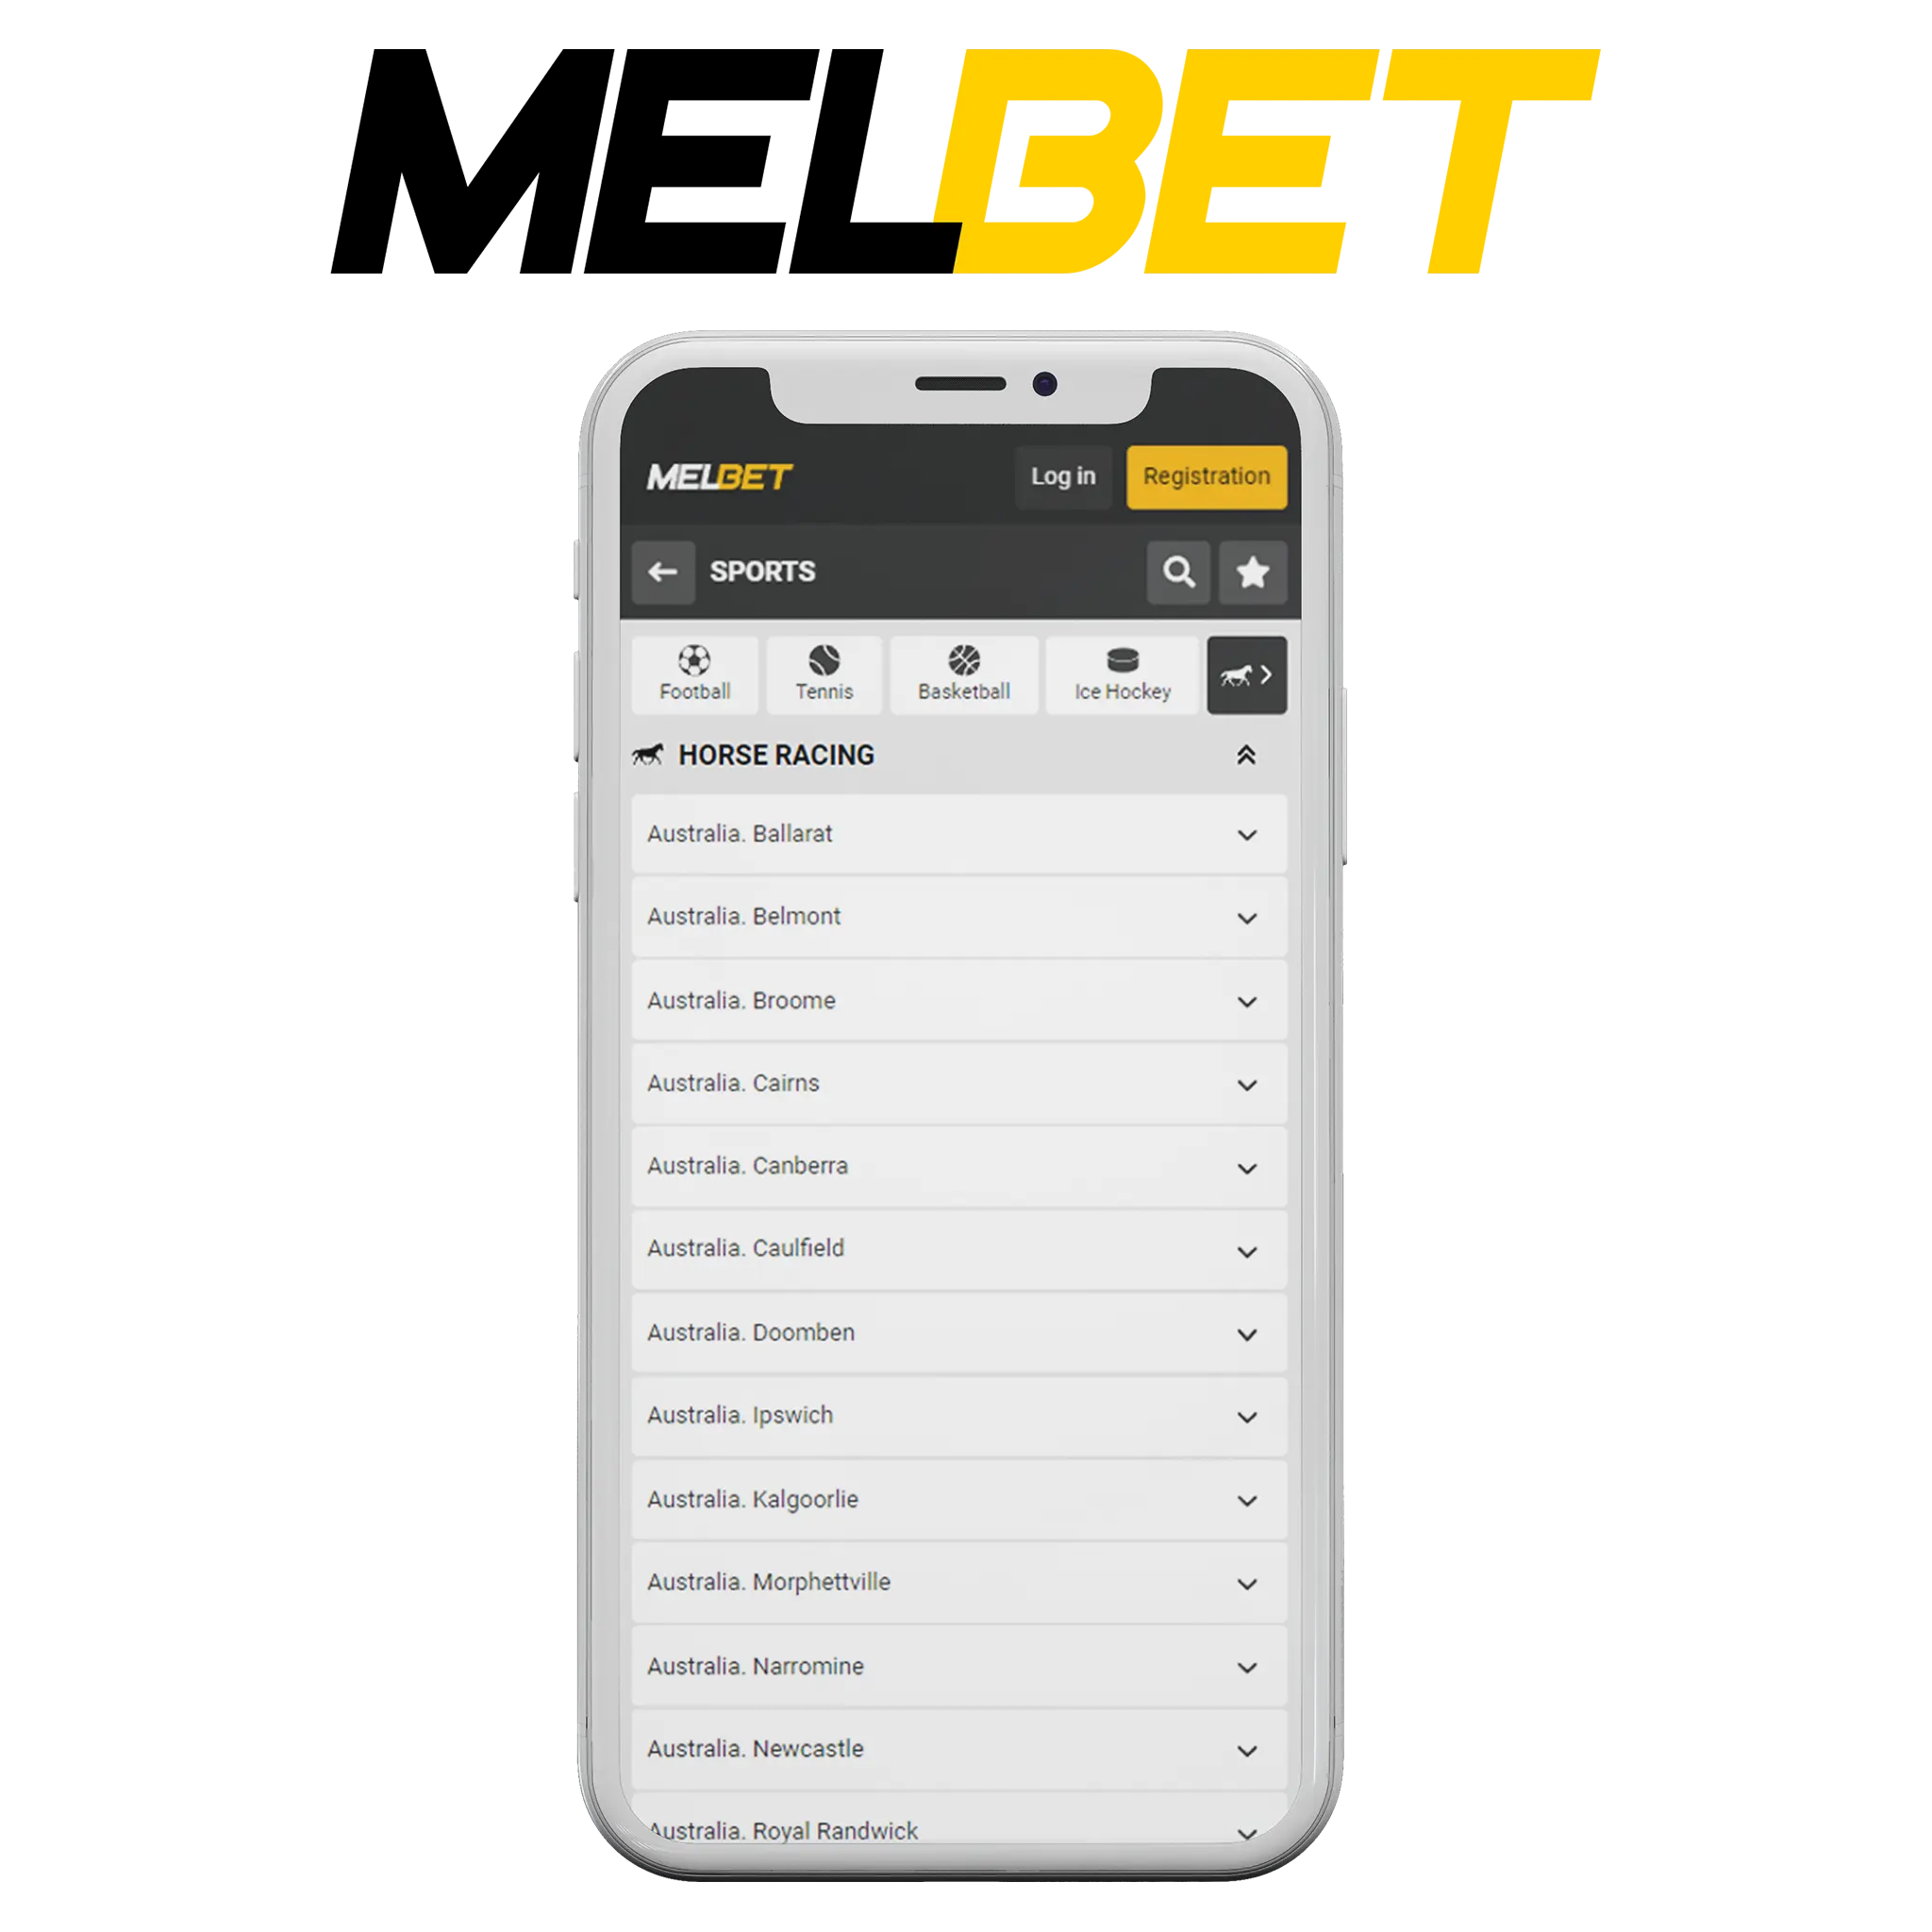 You can easily place bets on horse racing in the Melbet app.